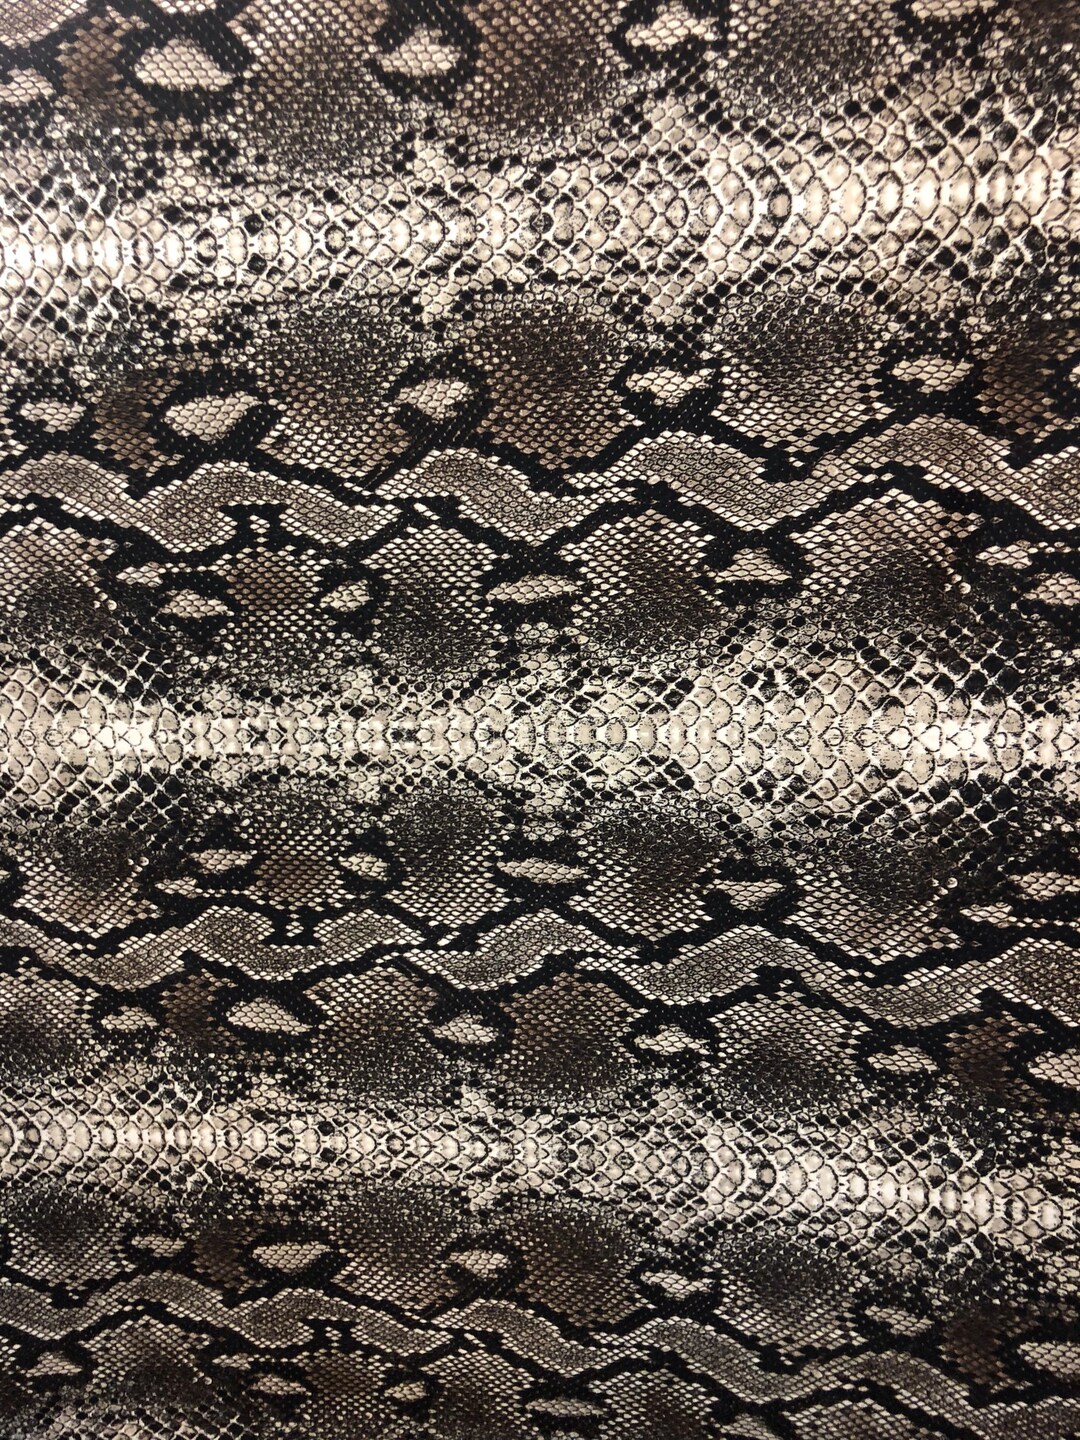 Sale Snake Print on Spandex Fabric Sold by the Yard Brown Natural Snake ...